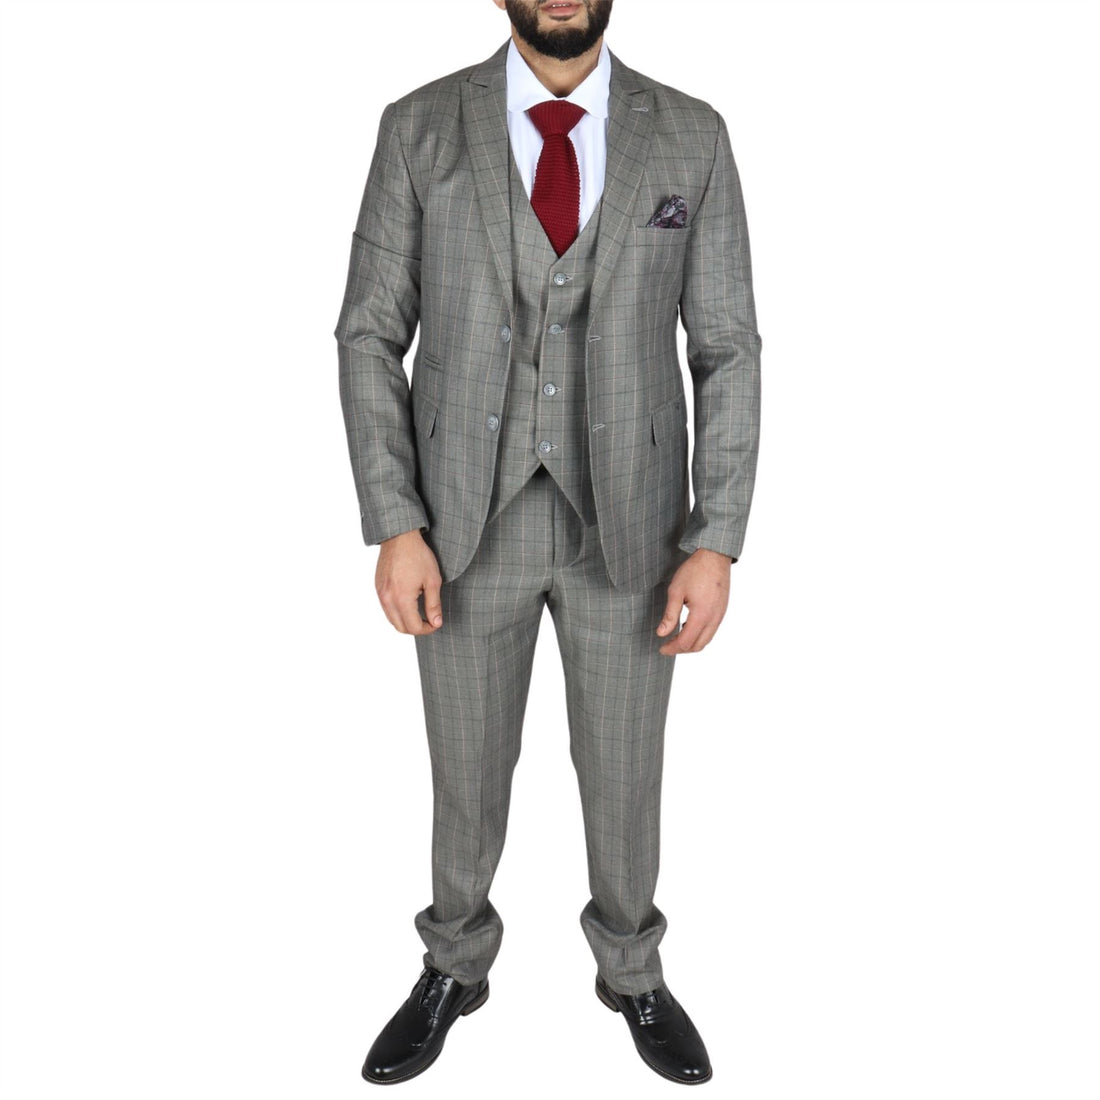 Men's Grey Suit Prince Of Wales Check Tailored Fit 3 Piece Formal Dress